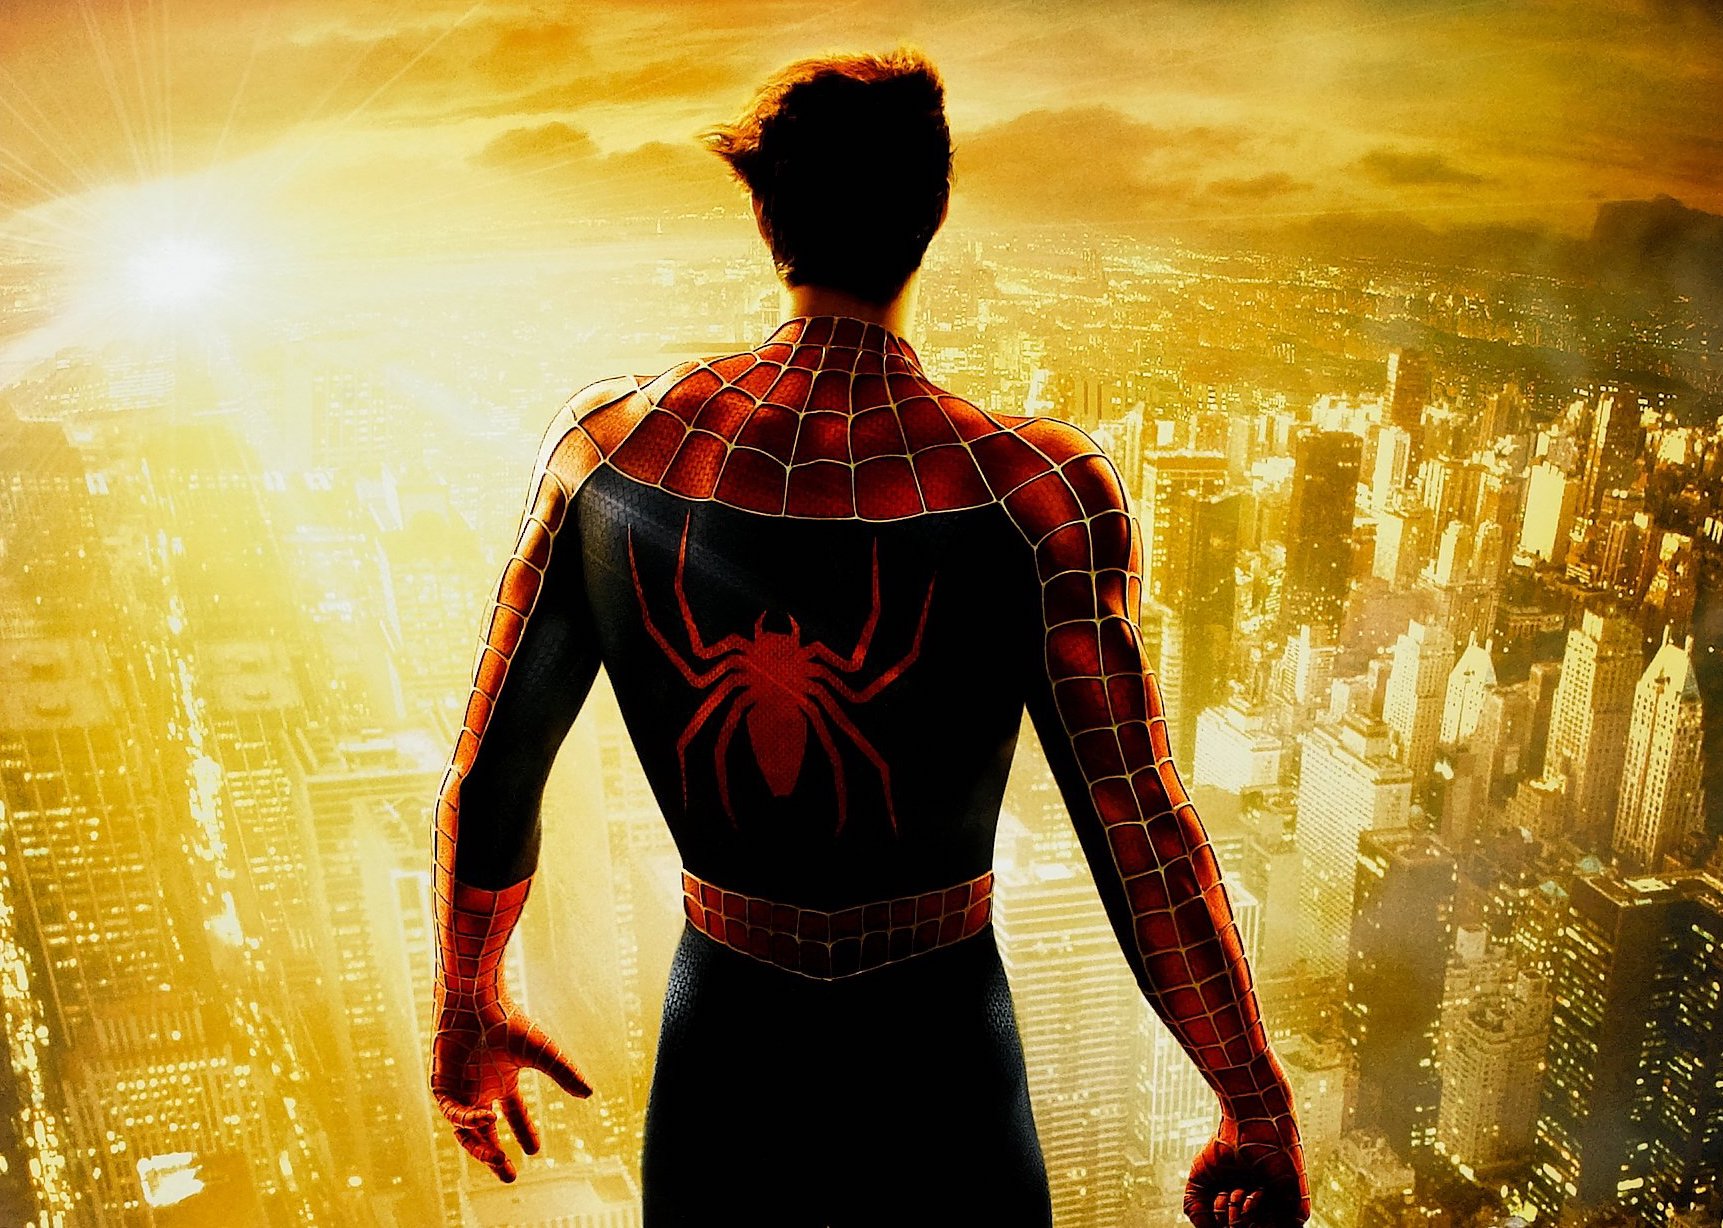 Detail from the Spider-Man 2 poster, with Peter Parker in Spider-Man costume, his mask off, back to the camera, facing out over a sunlit New York City